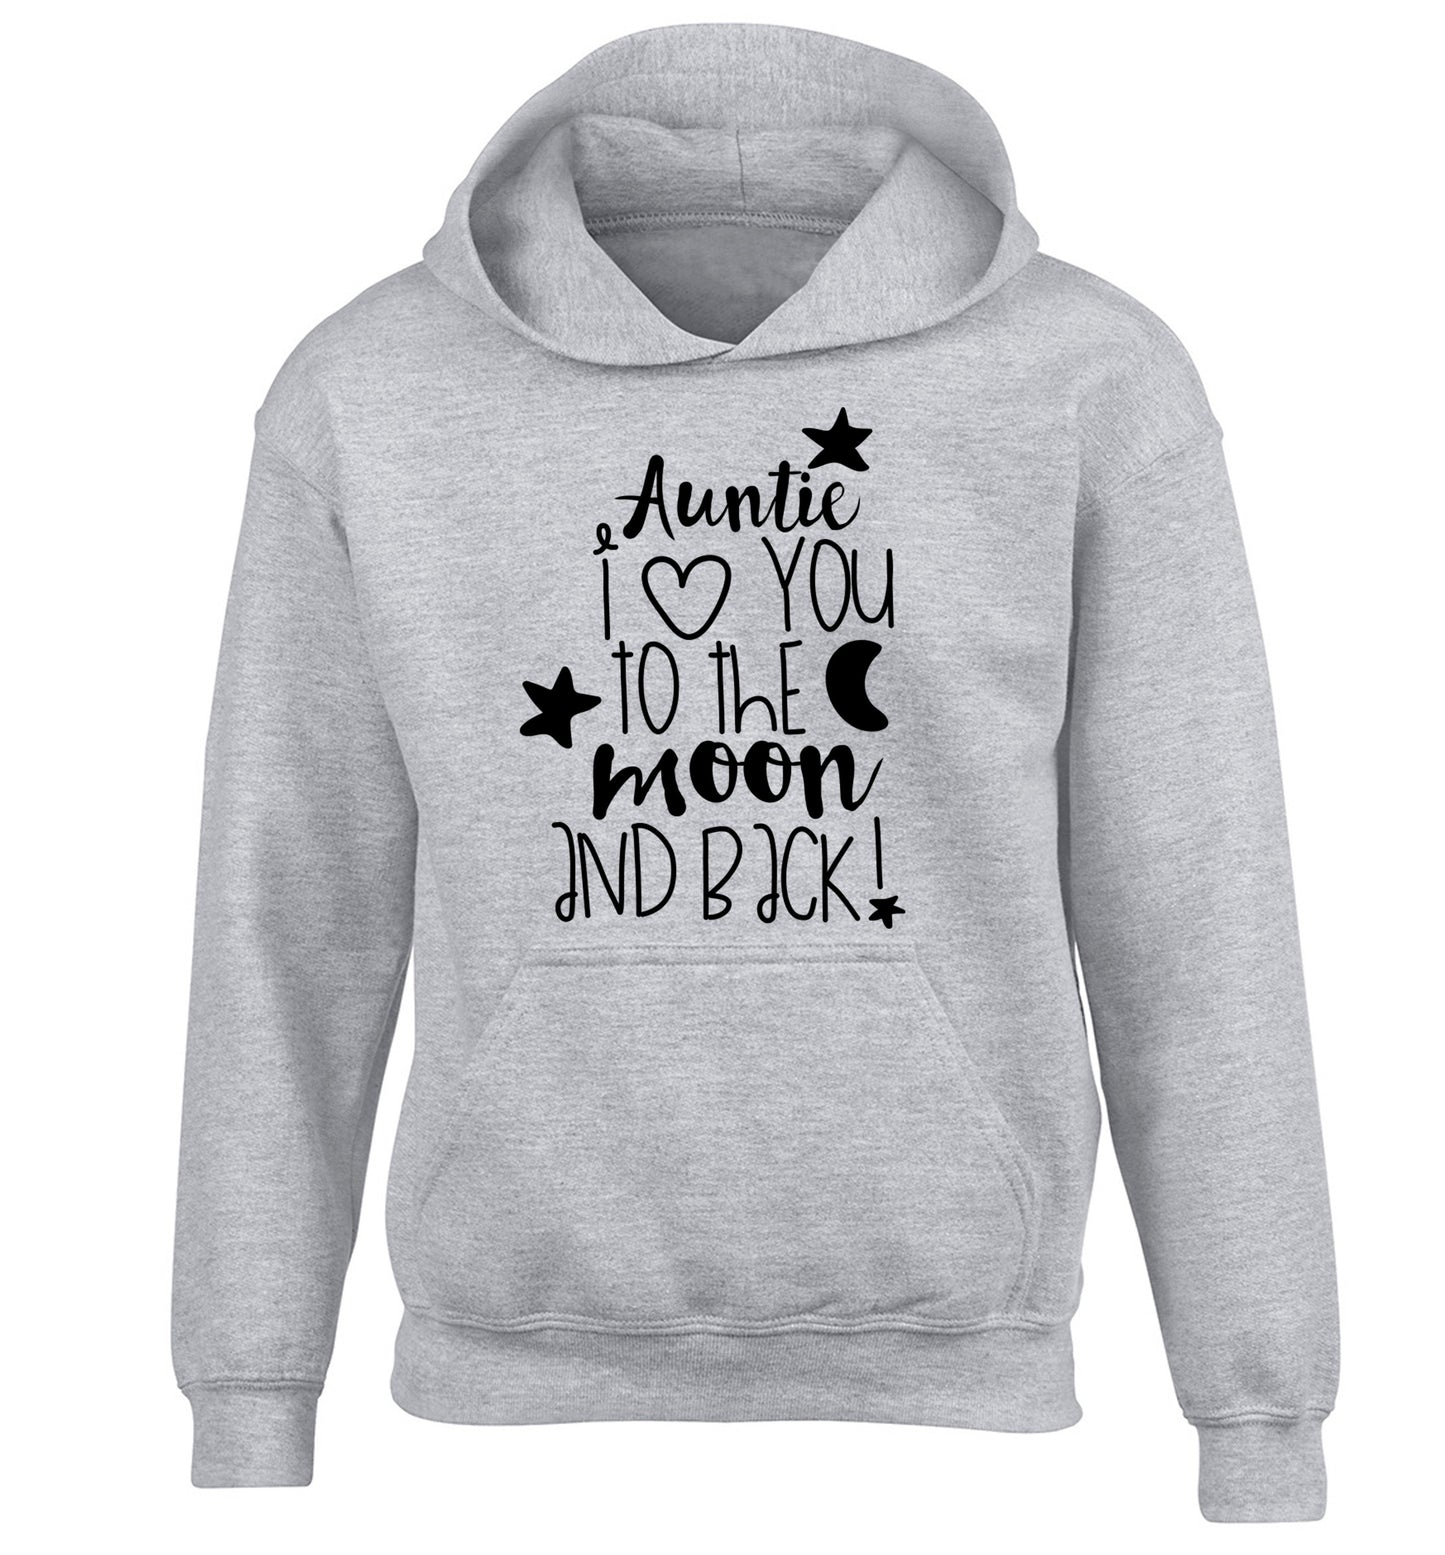 Auntie I love you to the moon and back children's grey hoodie 12-14 Years